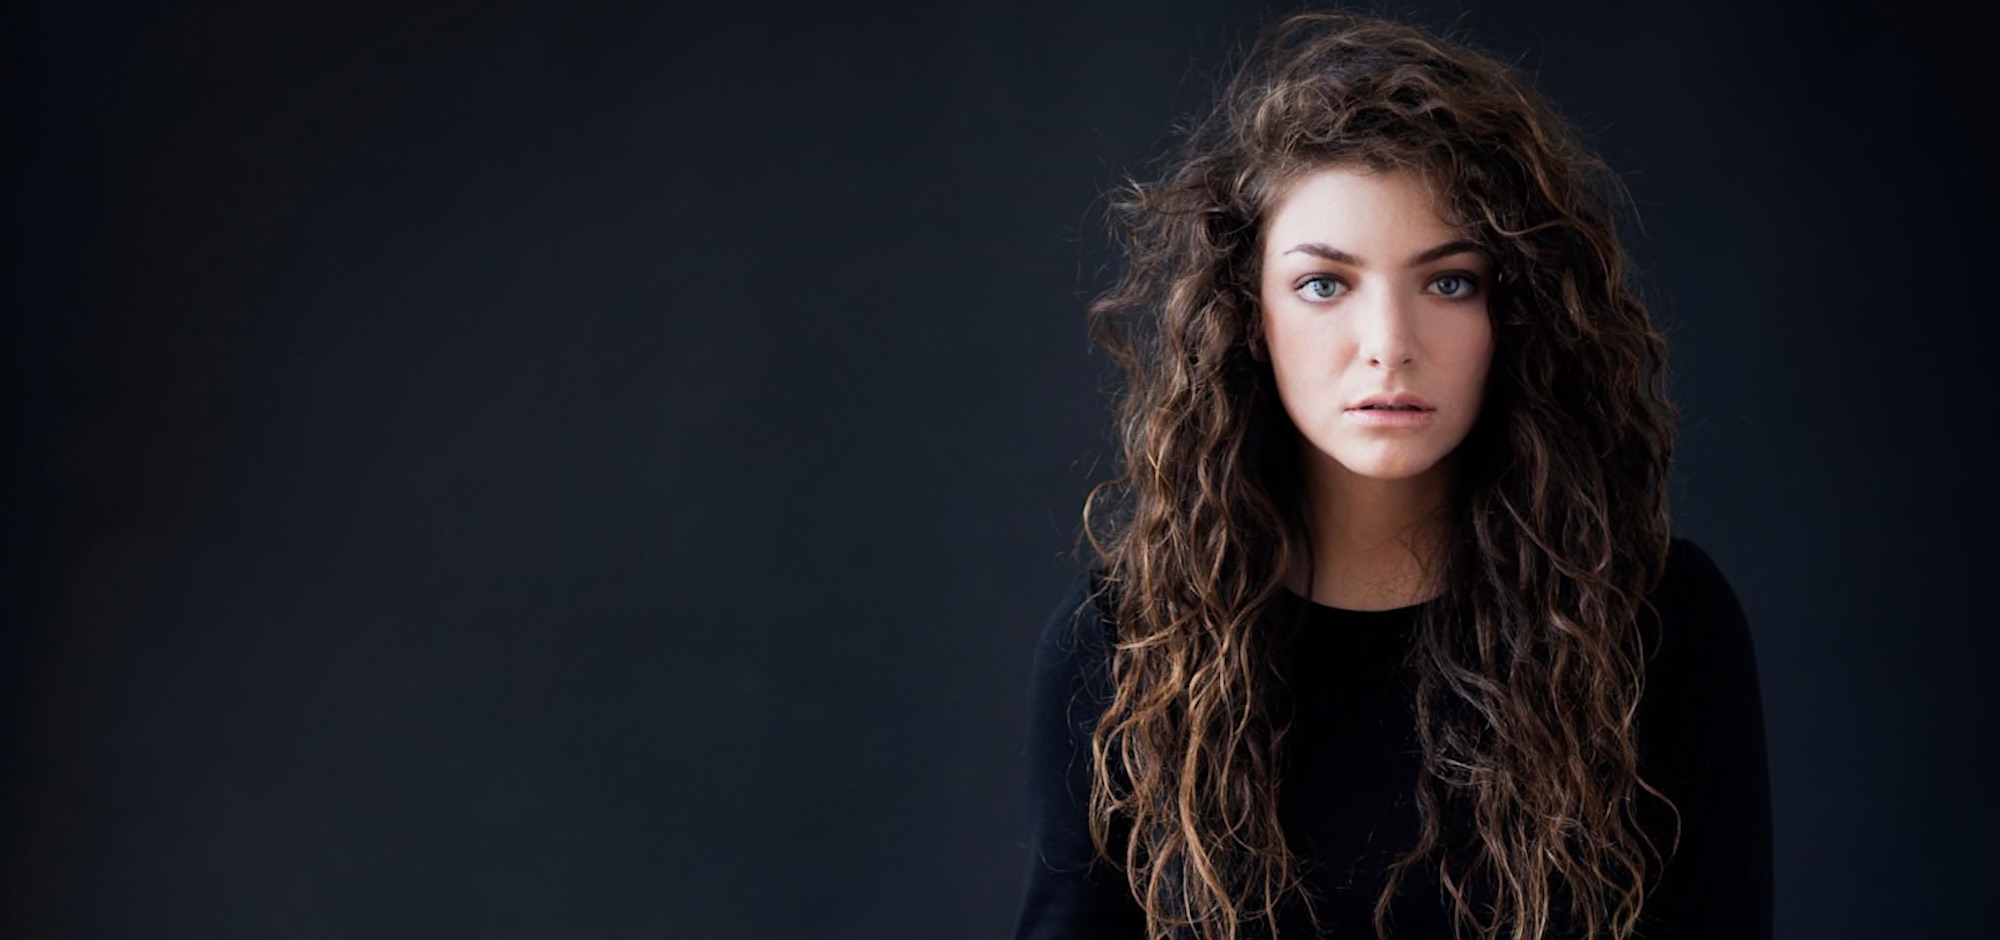 Lorde Releases Second ‘Solar Power’ Track “Stoned at the Nail Salon,” Featuring Phoebe Bridgers, Clairo, and Jack Antonoff